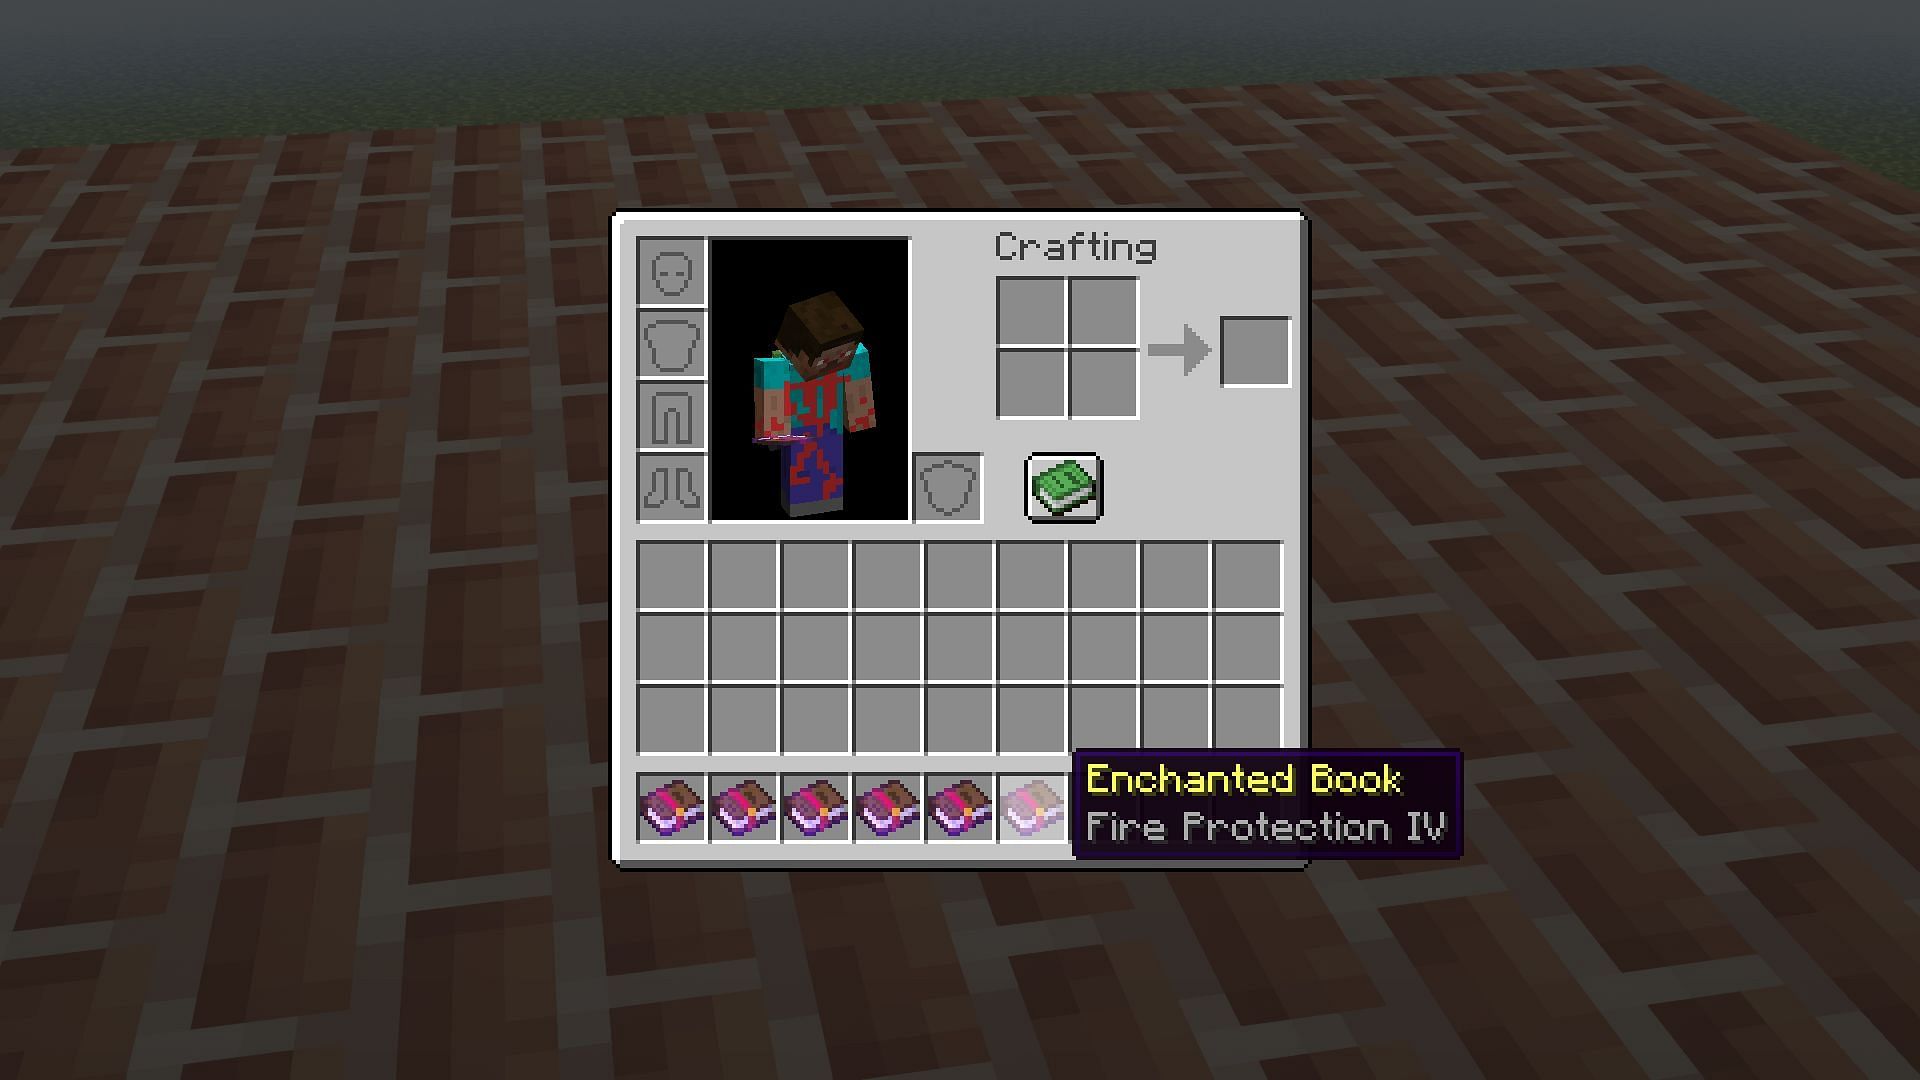 Fire Protection enchantment in Minecraft (Image via Mojang)